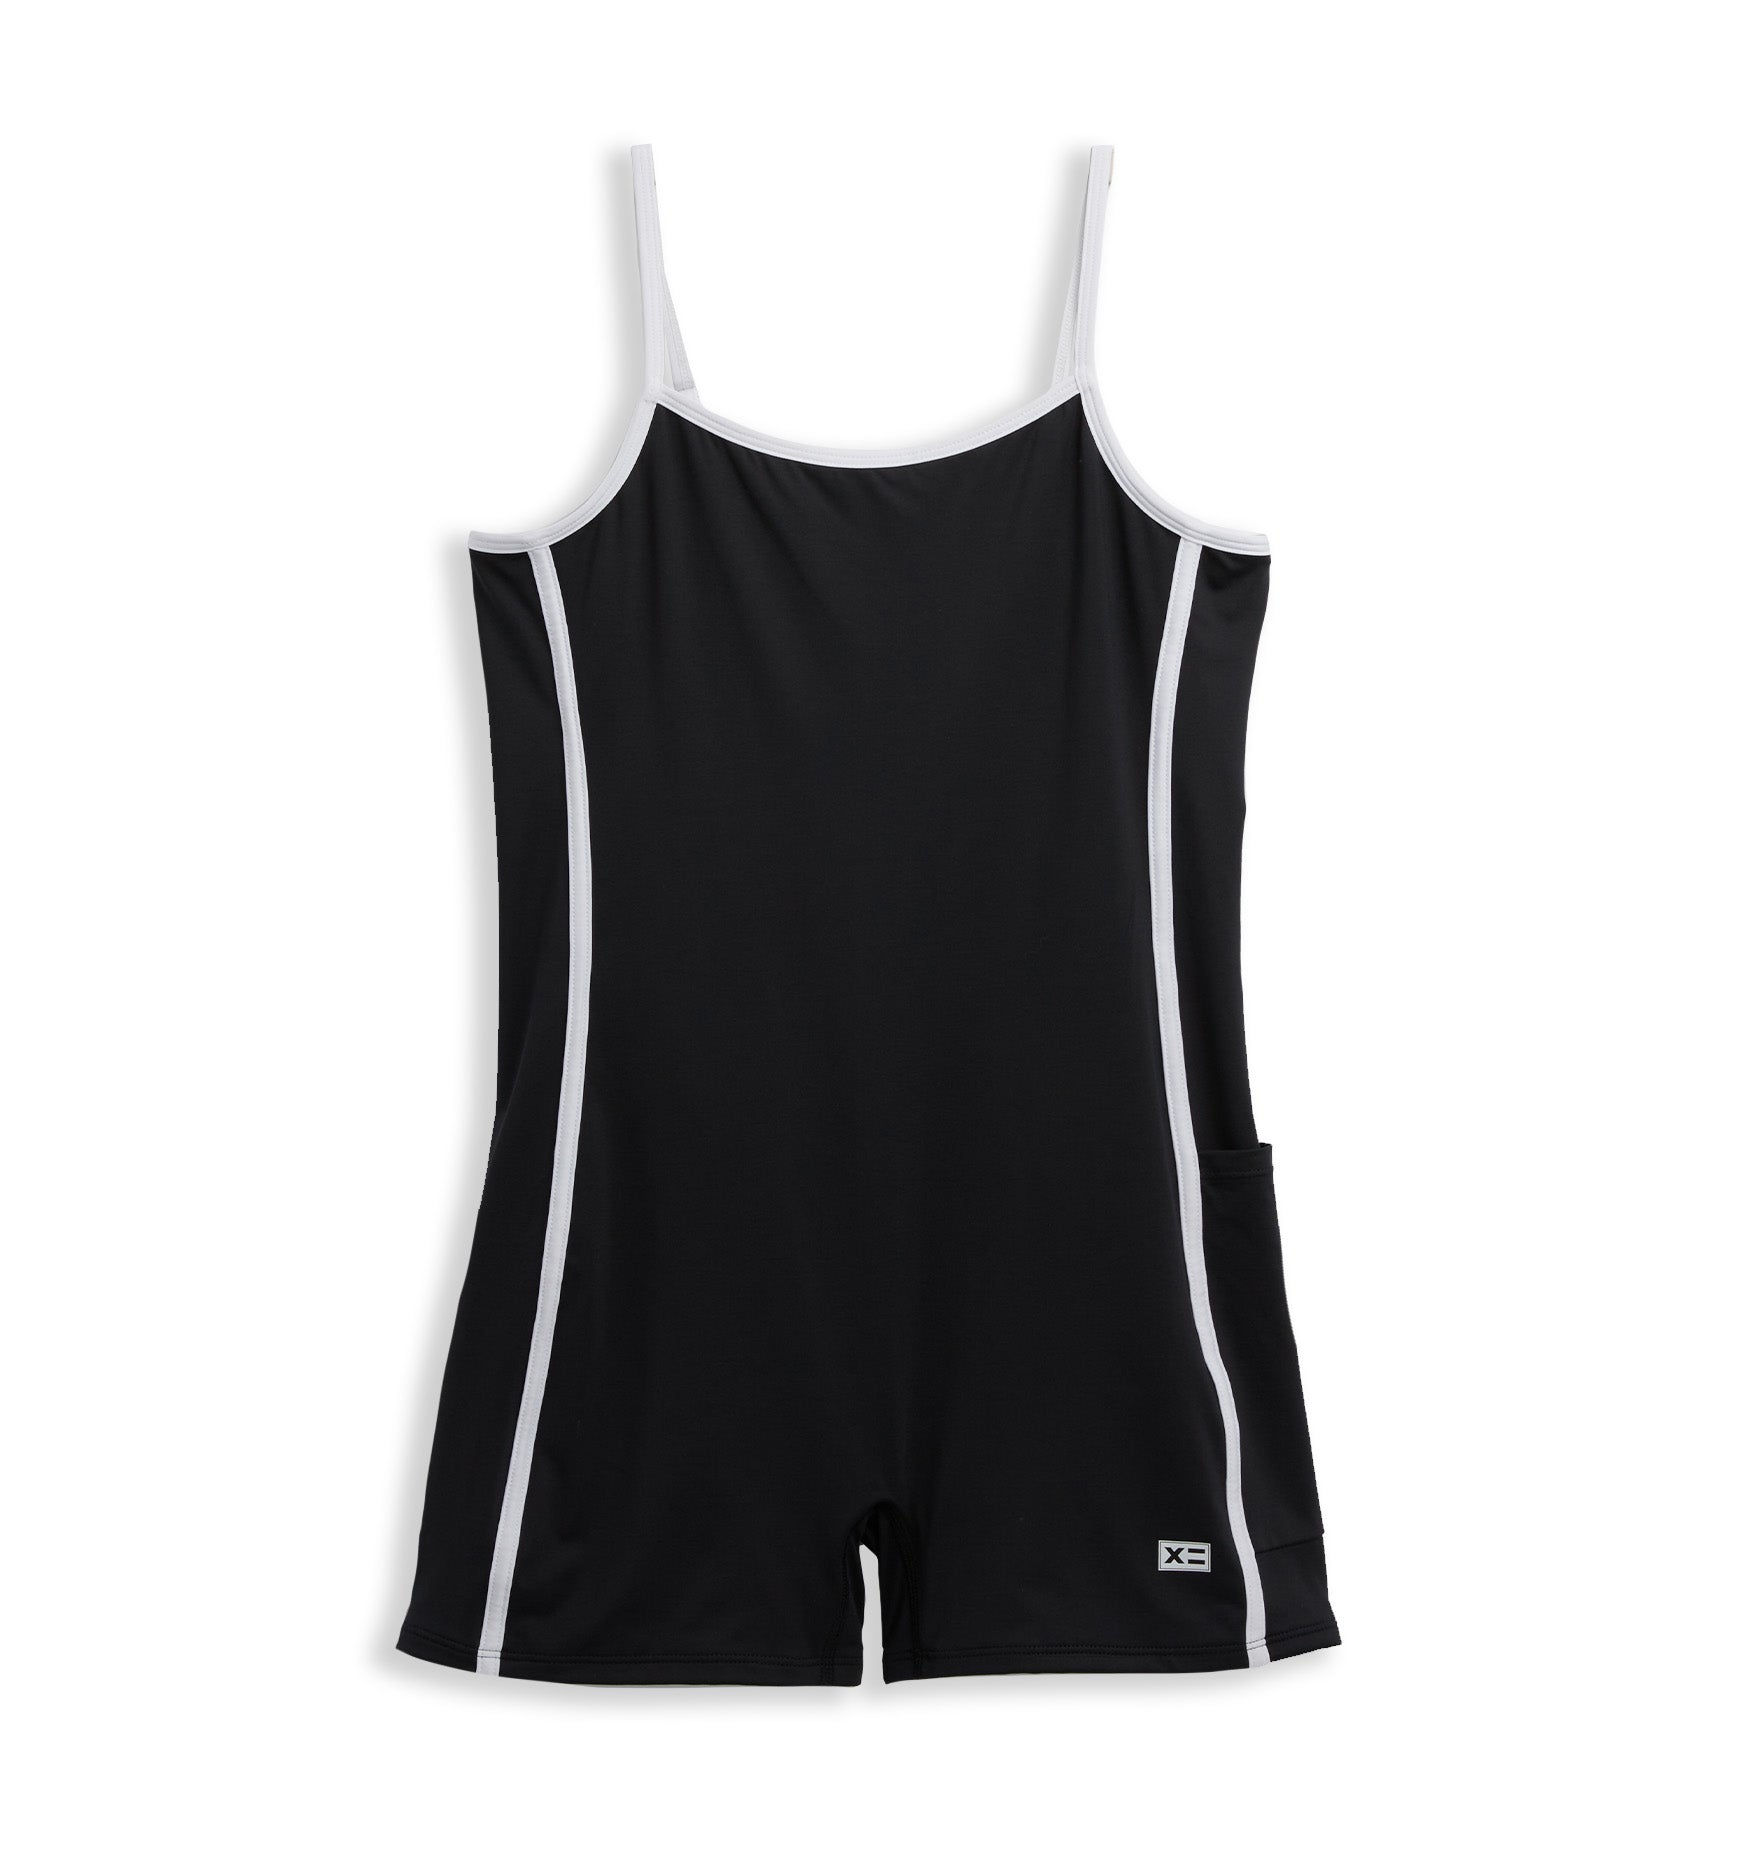 TomboyX Zip-Up Swim Top, Racerback Bathing Suit Compression Sport Swimming  Bra UPF 50 Sun Protection, Size Inclusive (XS-6X) Don't Be Jelly Medium